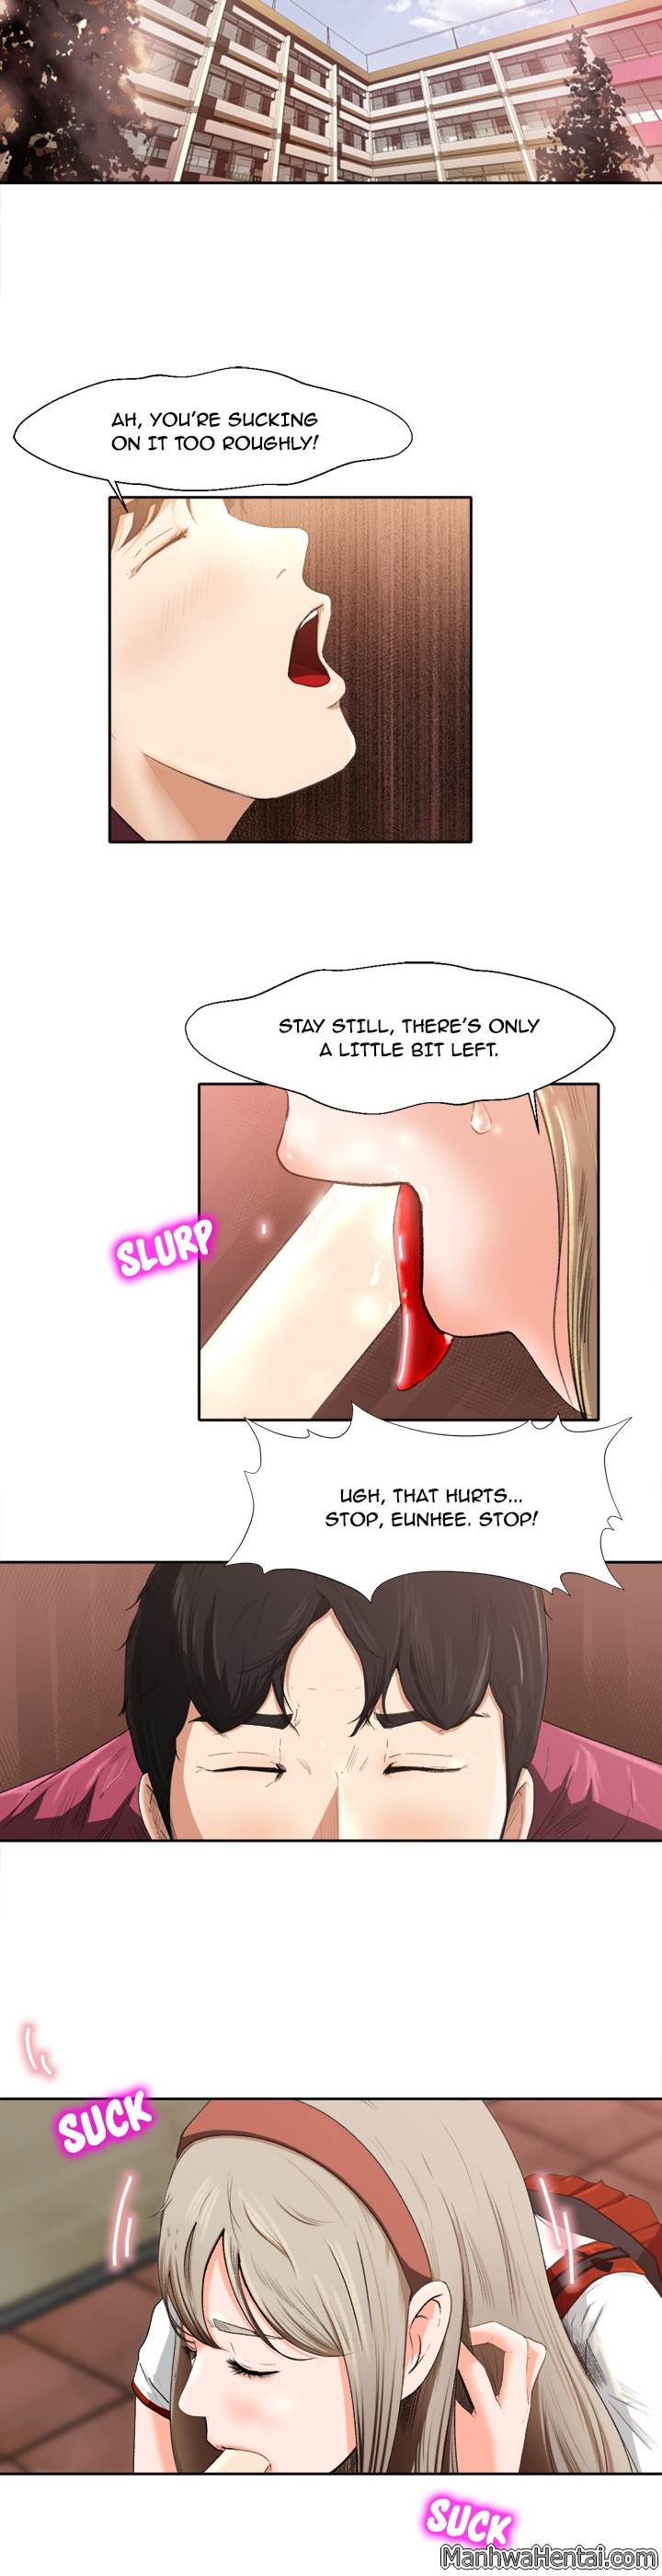 Inside the Uniform - Chapter 1 Page 13